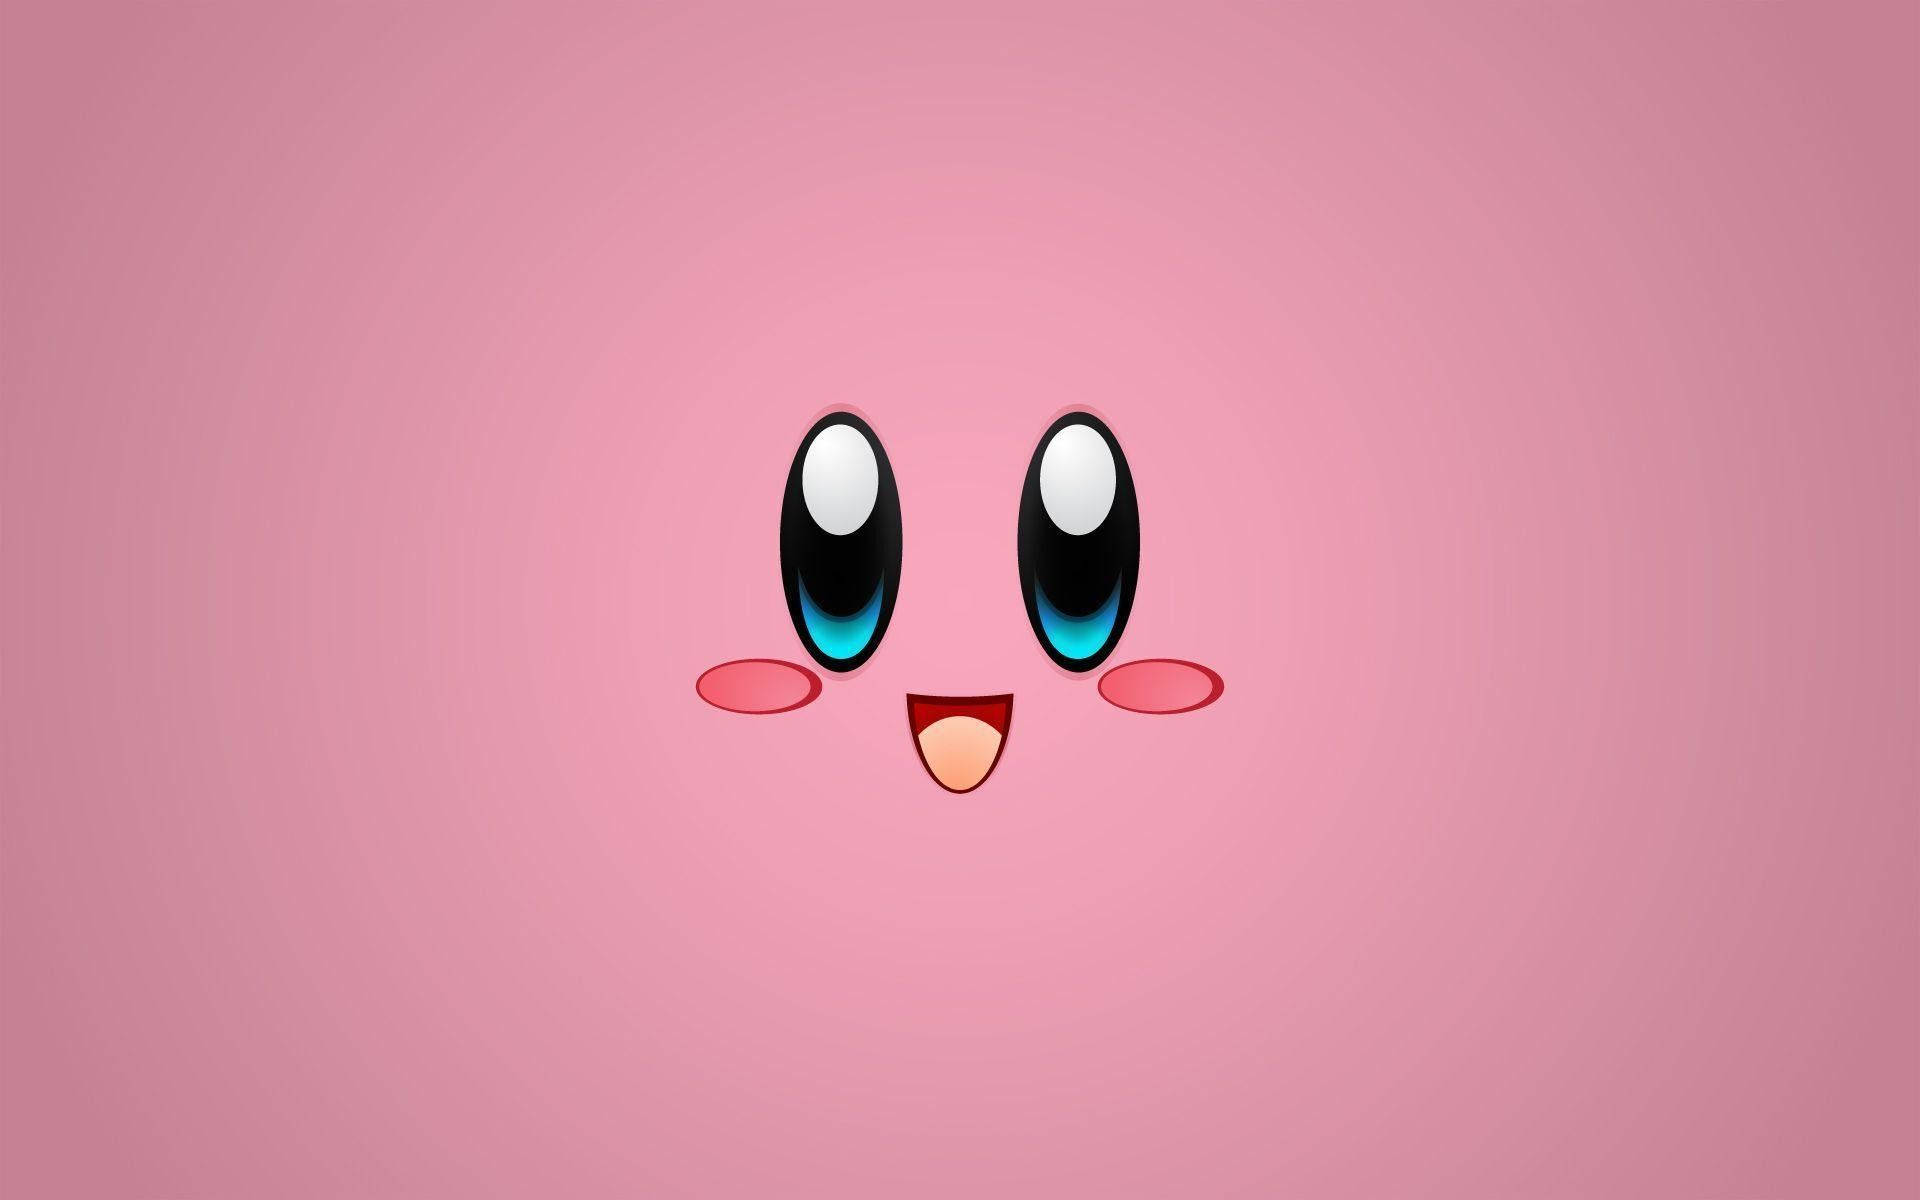 A vibrant pink-colored Kirby looks happy and friendly, inviting us to join the adventure. Wallpaper